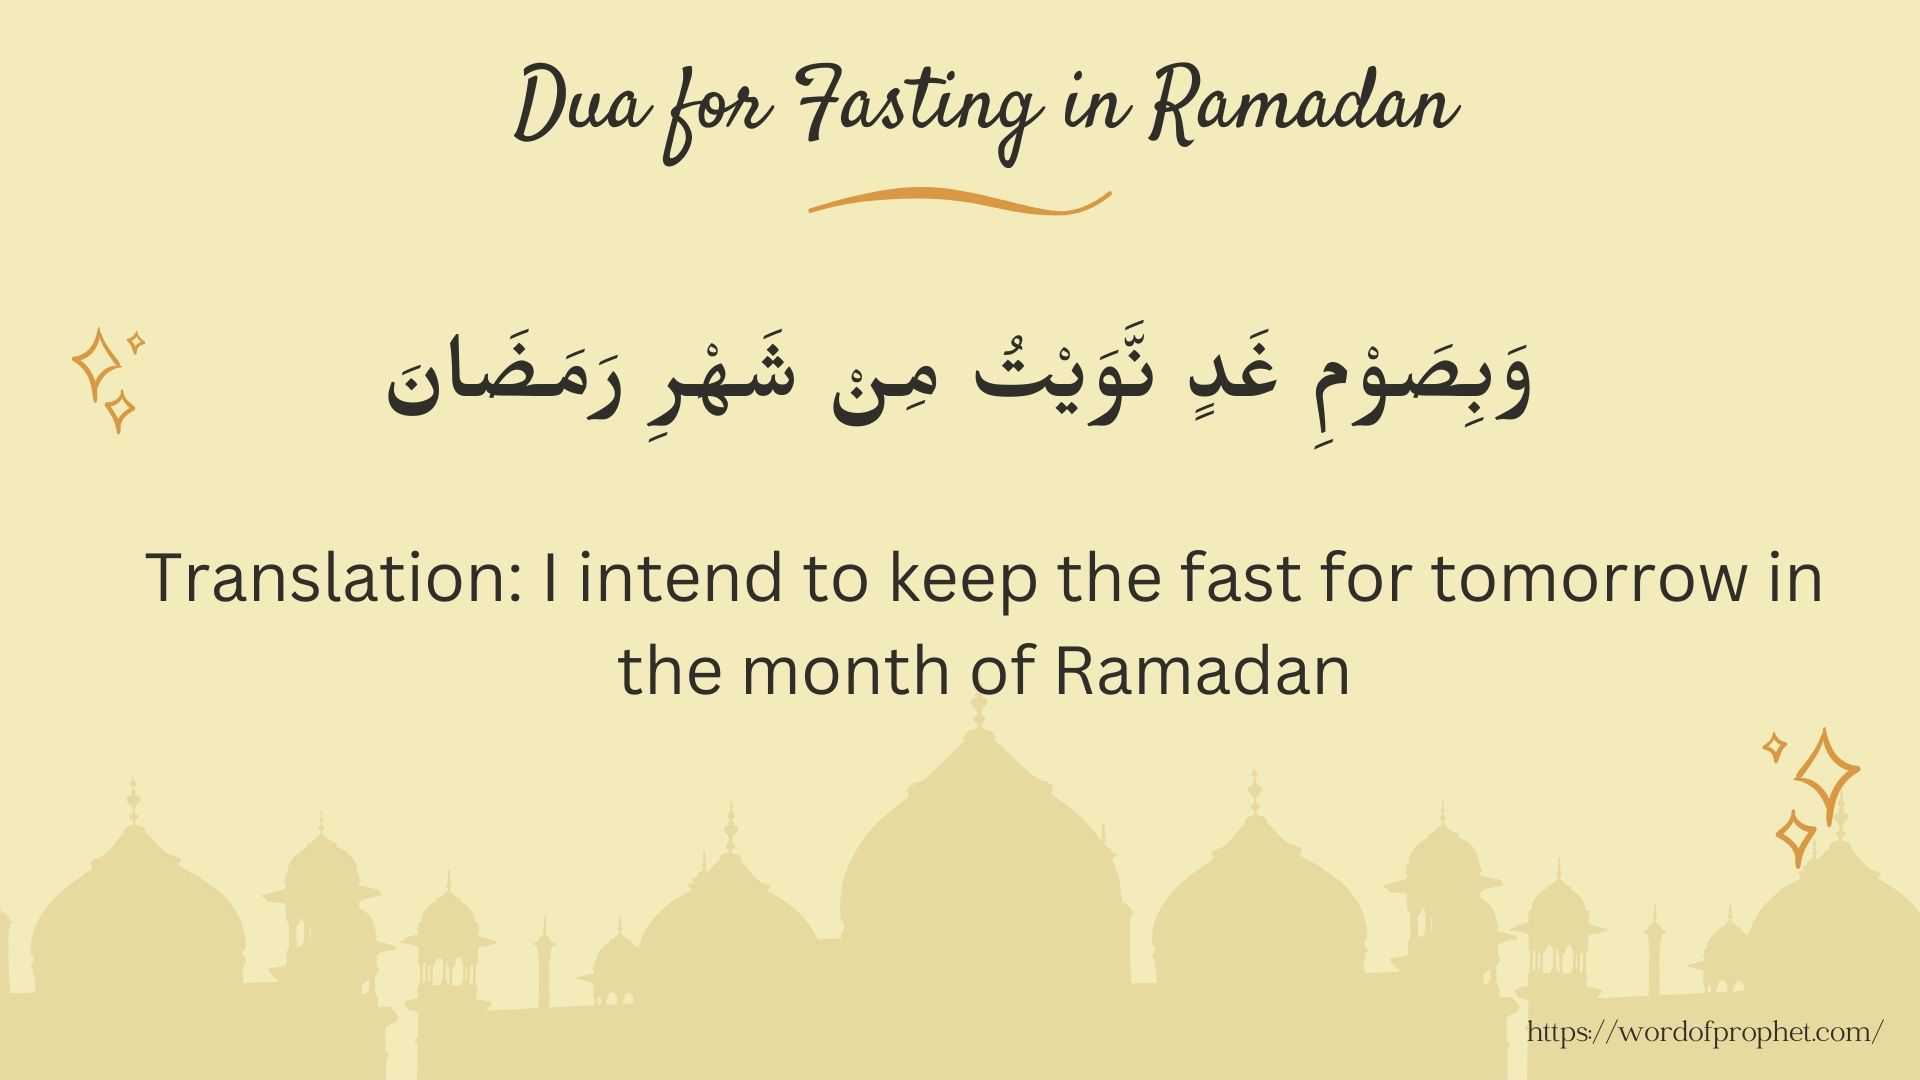 Dua for Fasting (Starting a Fast) in Ramadan 1